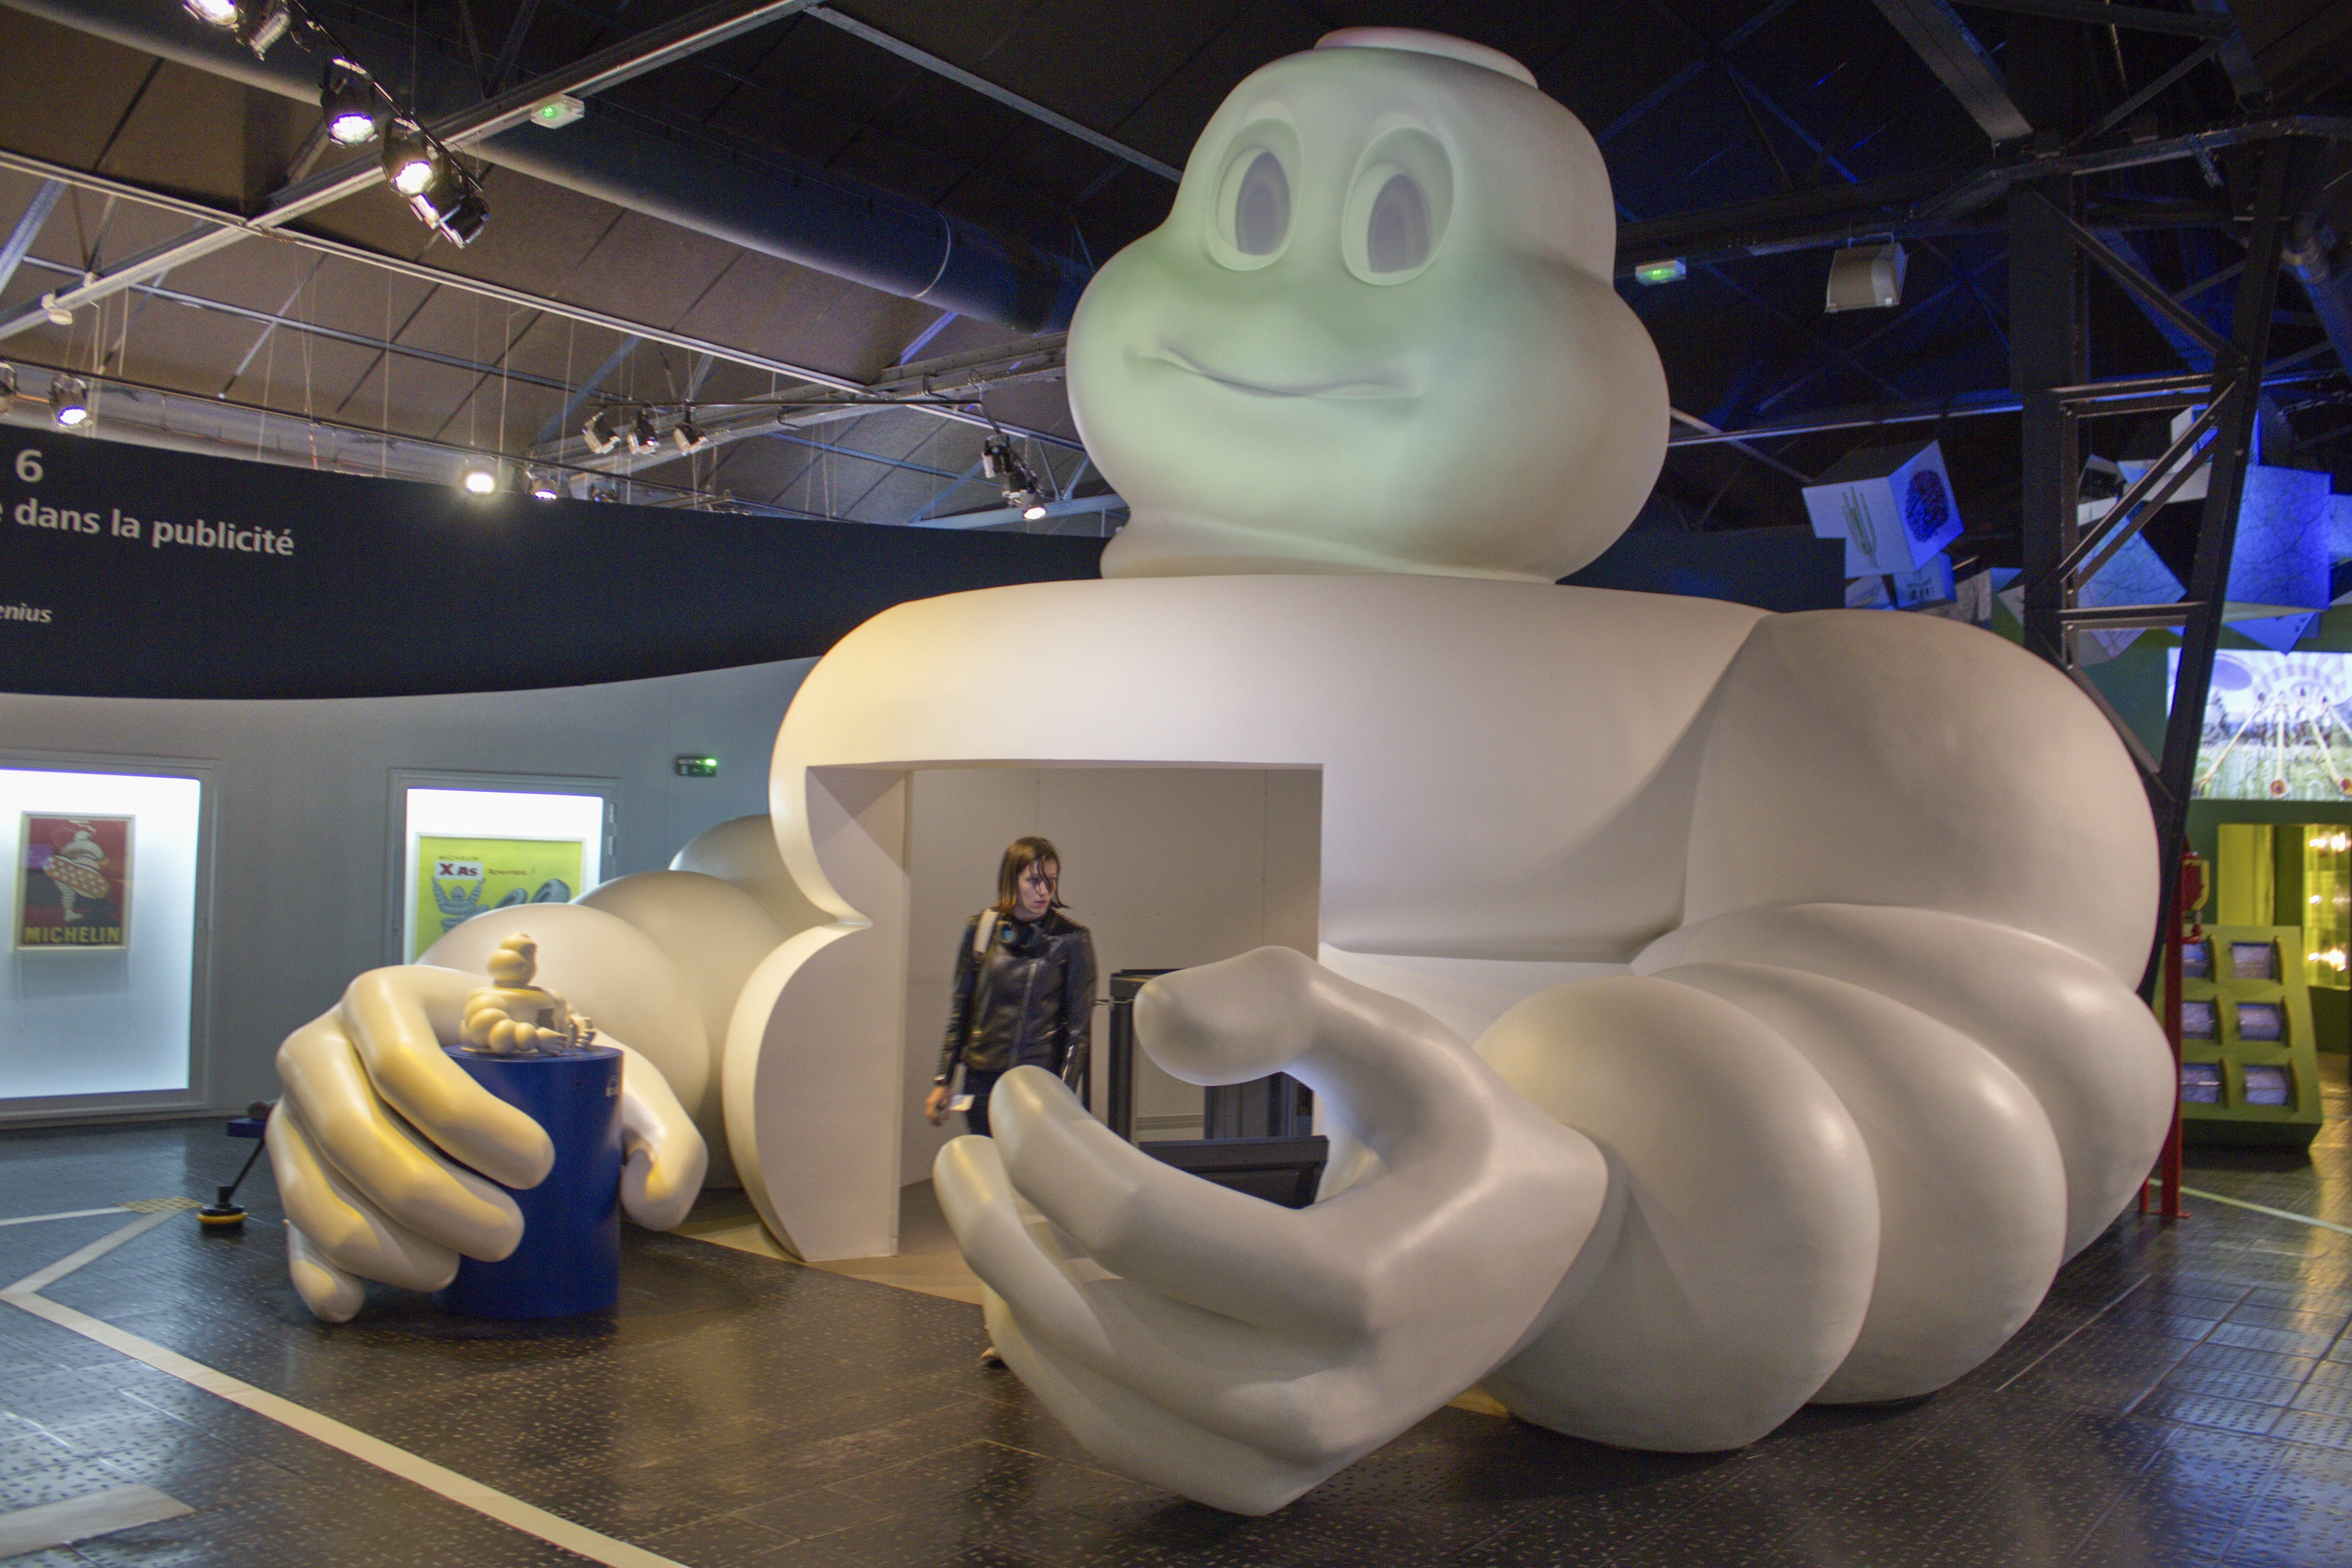 A massive Michelin Man stairway entrance at the Michelin Adventure, in Clermont-Ferrand, France. Pictures: Keith Mundy